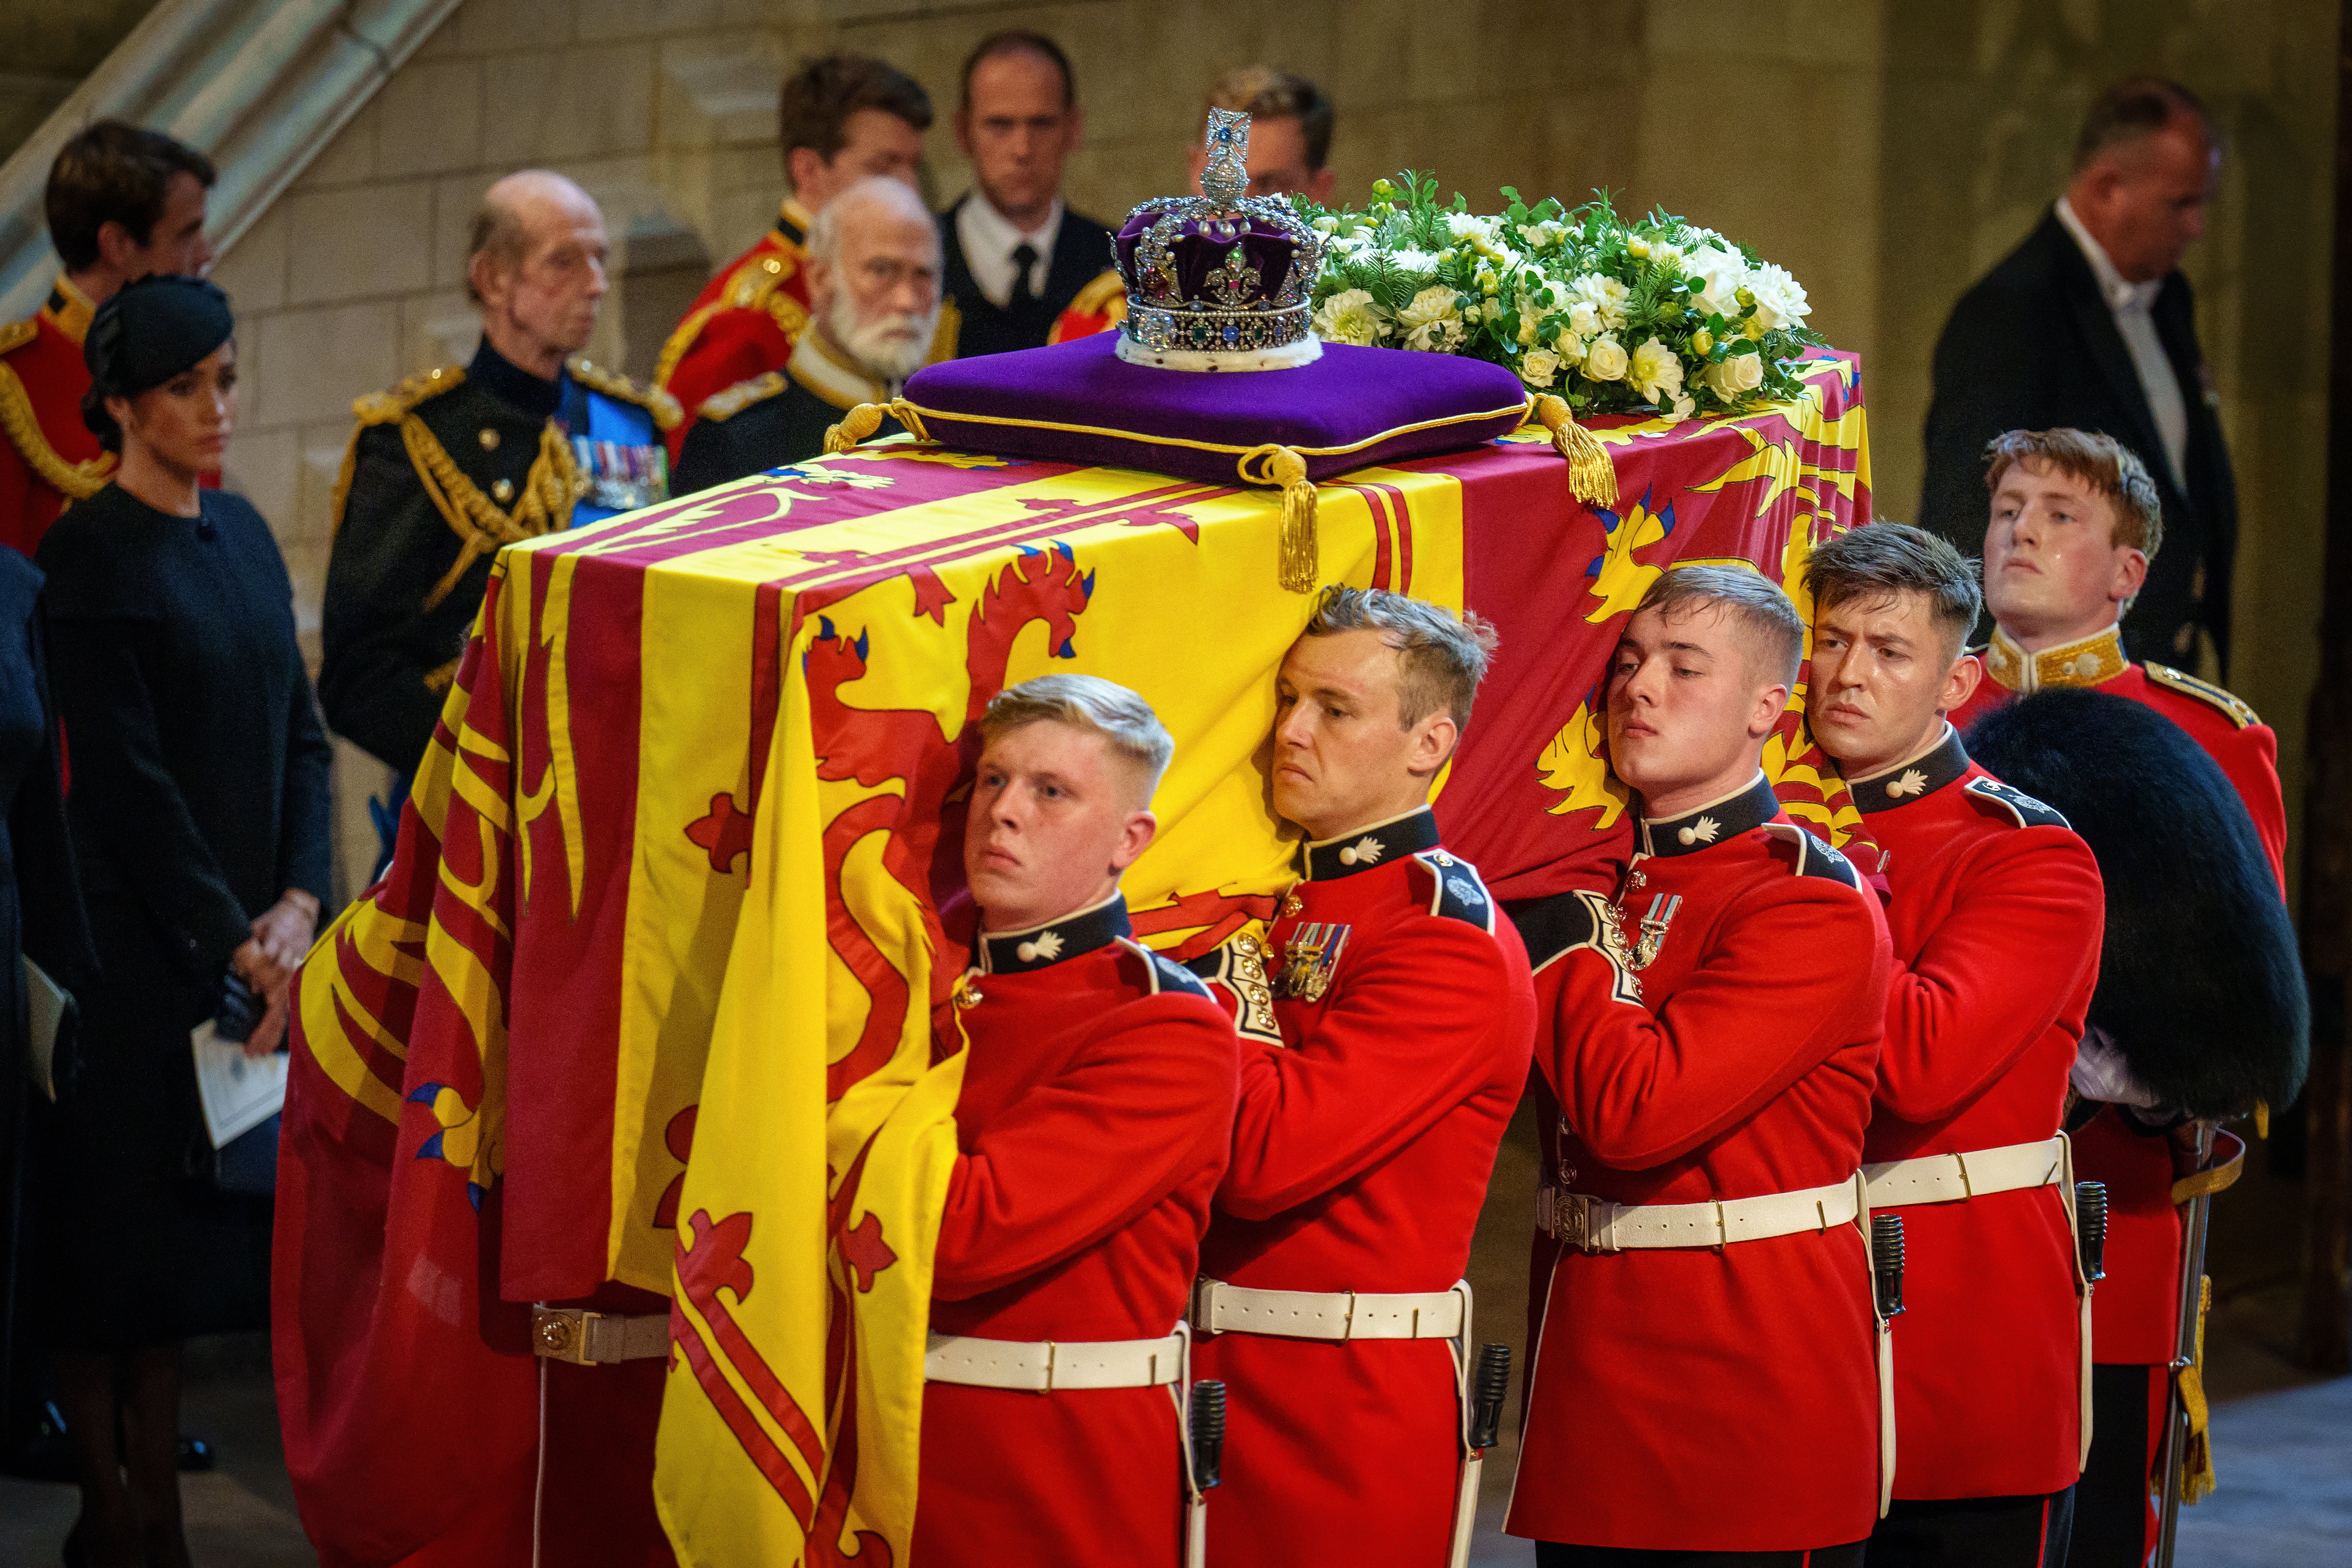 The coffin of Queen Elizabeth II carried into The Palace of Westminster by guardsmen, 1st Battalion Grenadier Guards during the procession for the Lying-in State of Queen Elizabeth II on September 14, 2022 in London, England | Source: Getty Images